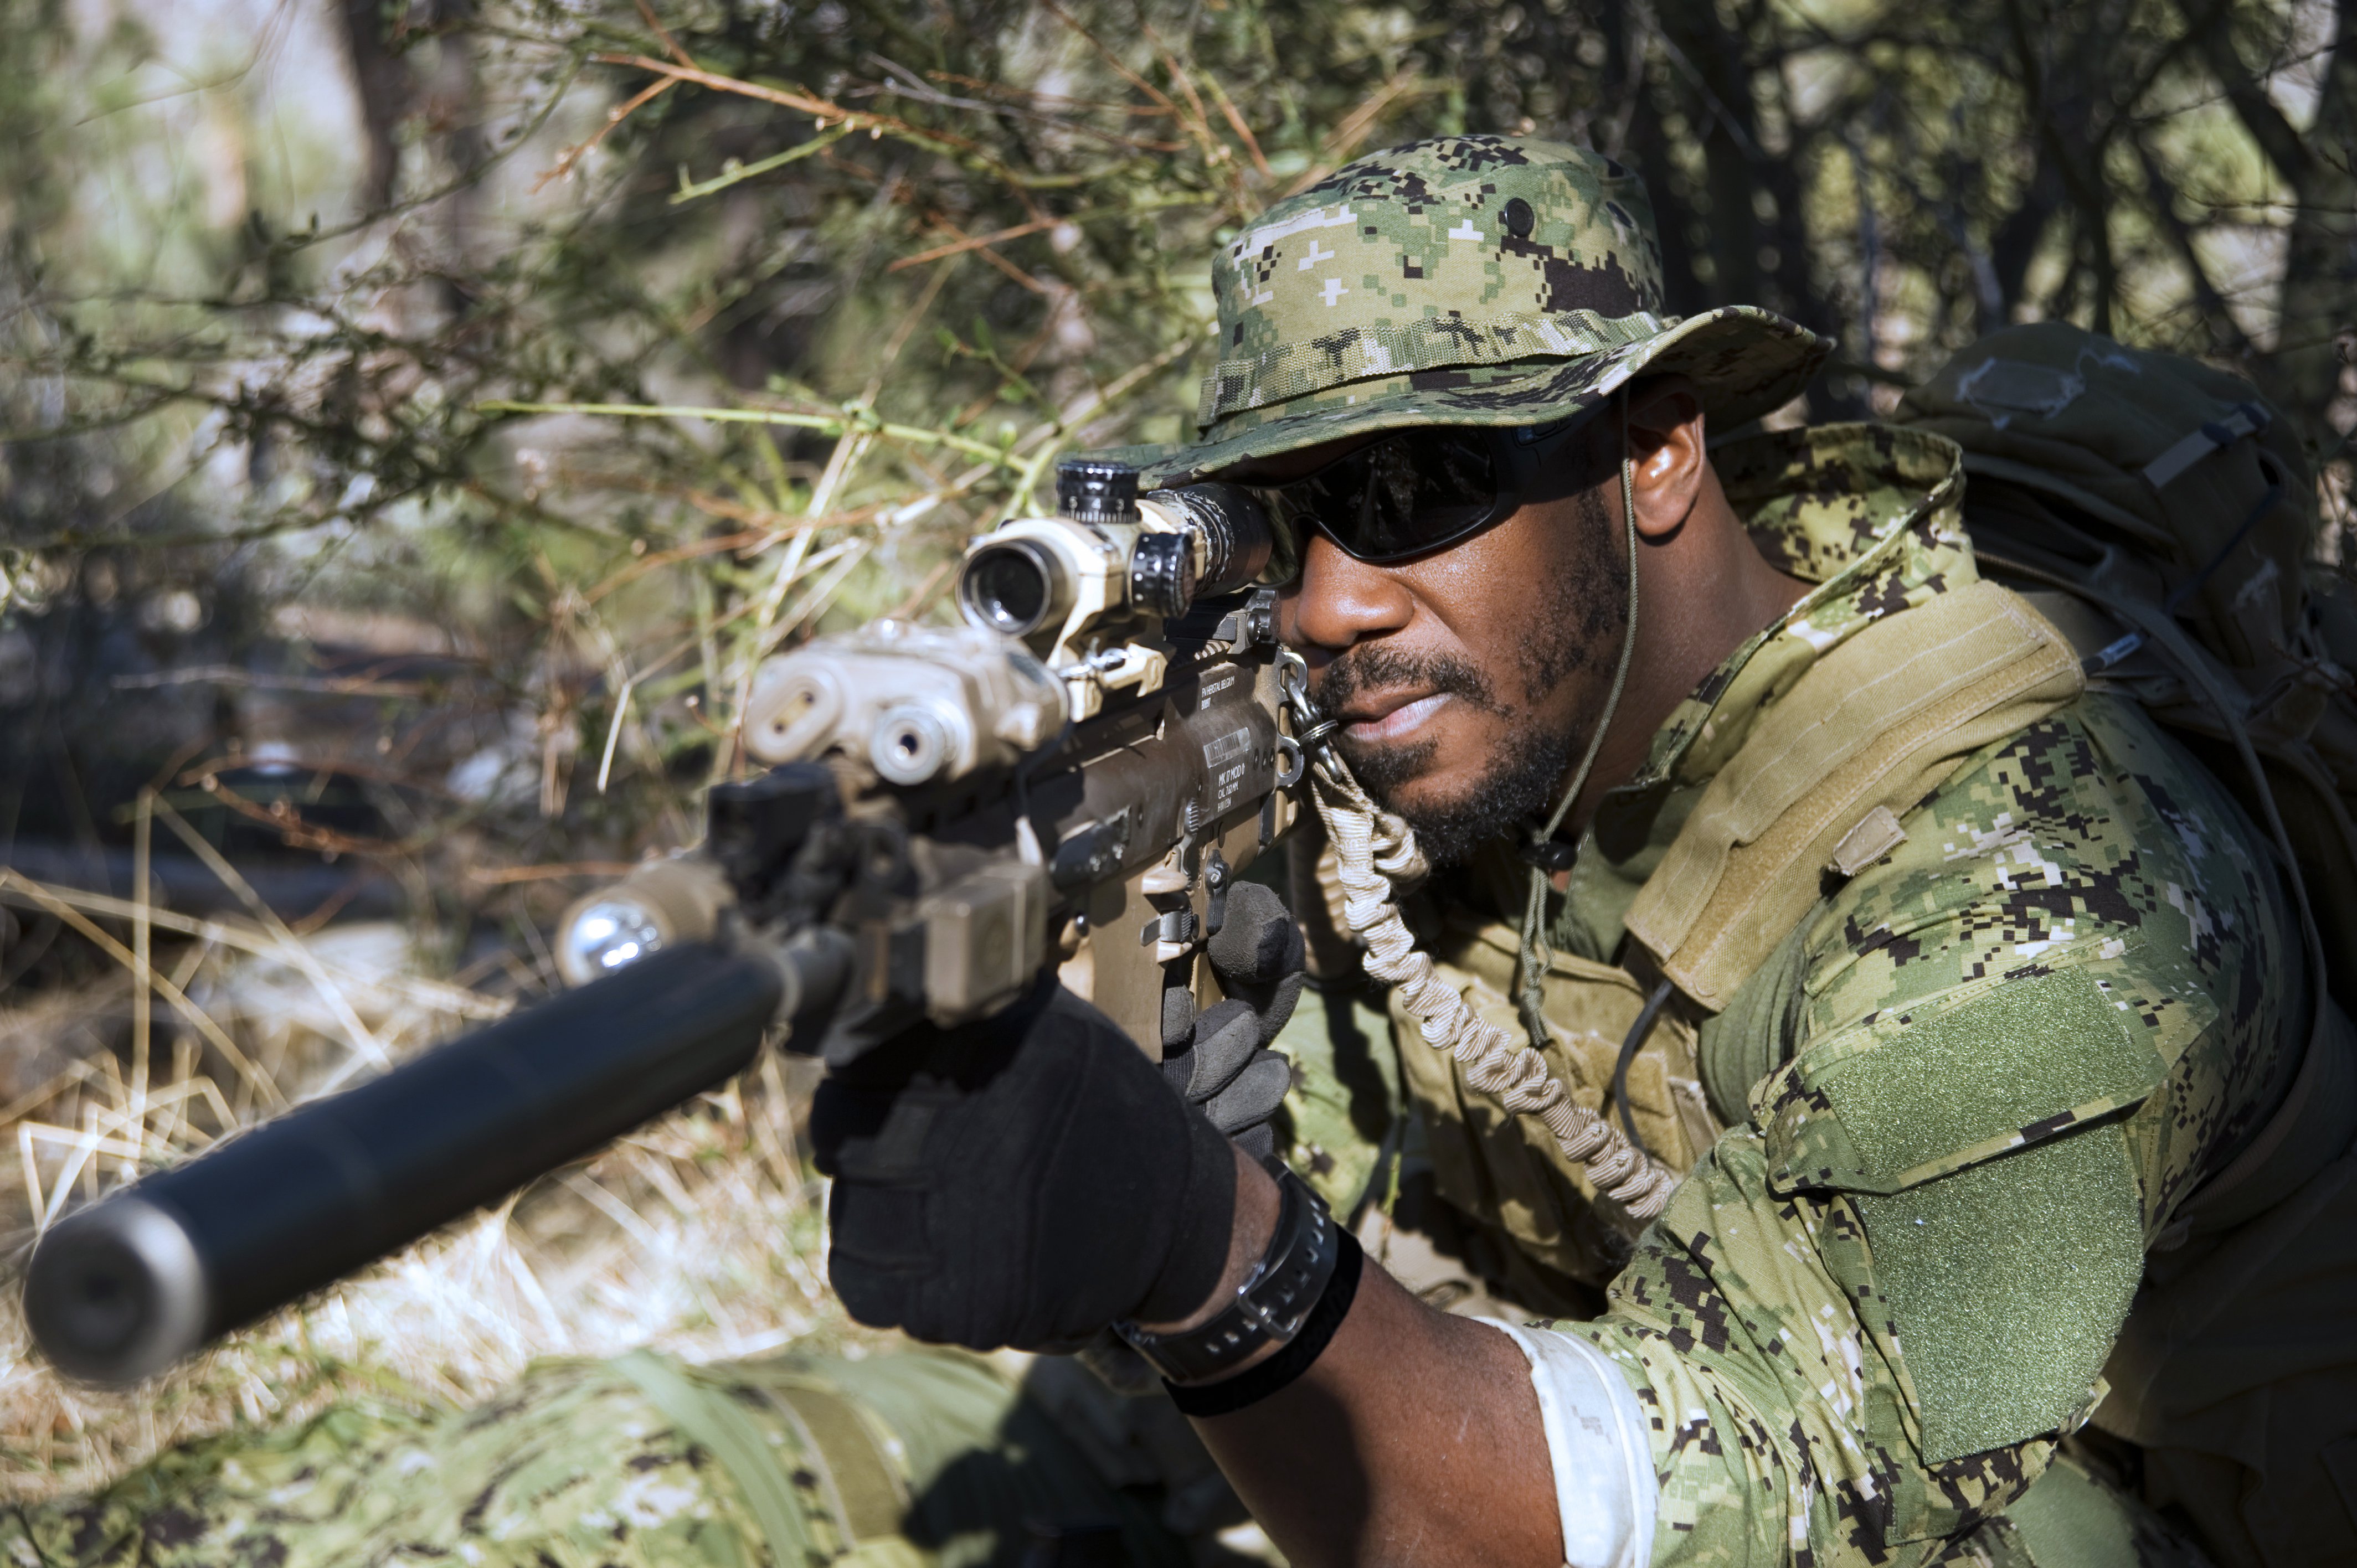 Navy-SEAL-Photo-Squad-Sniper-SOFREP